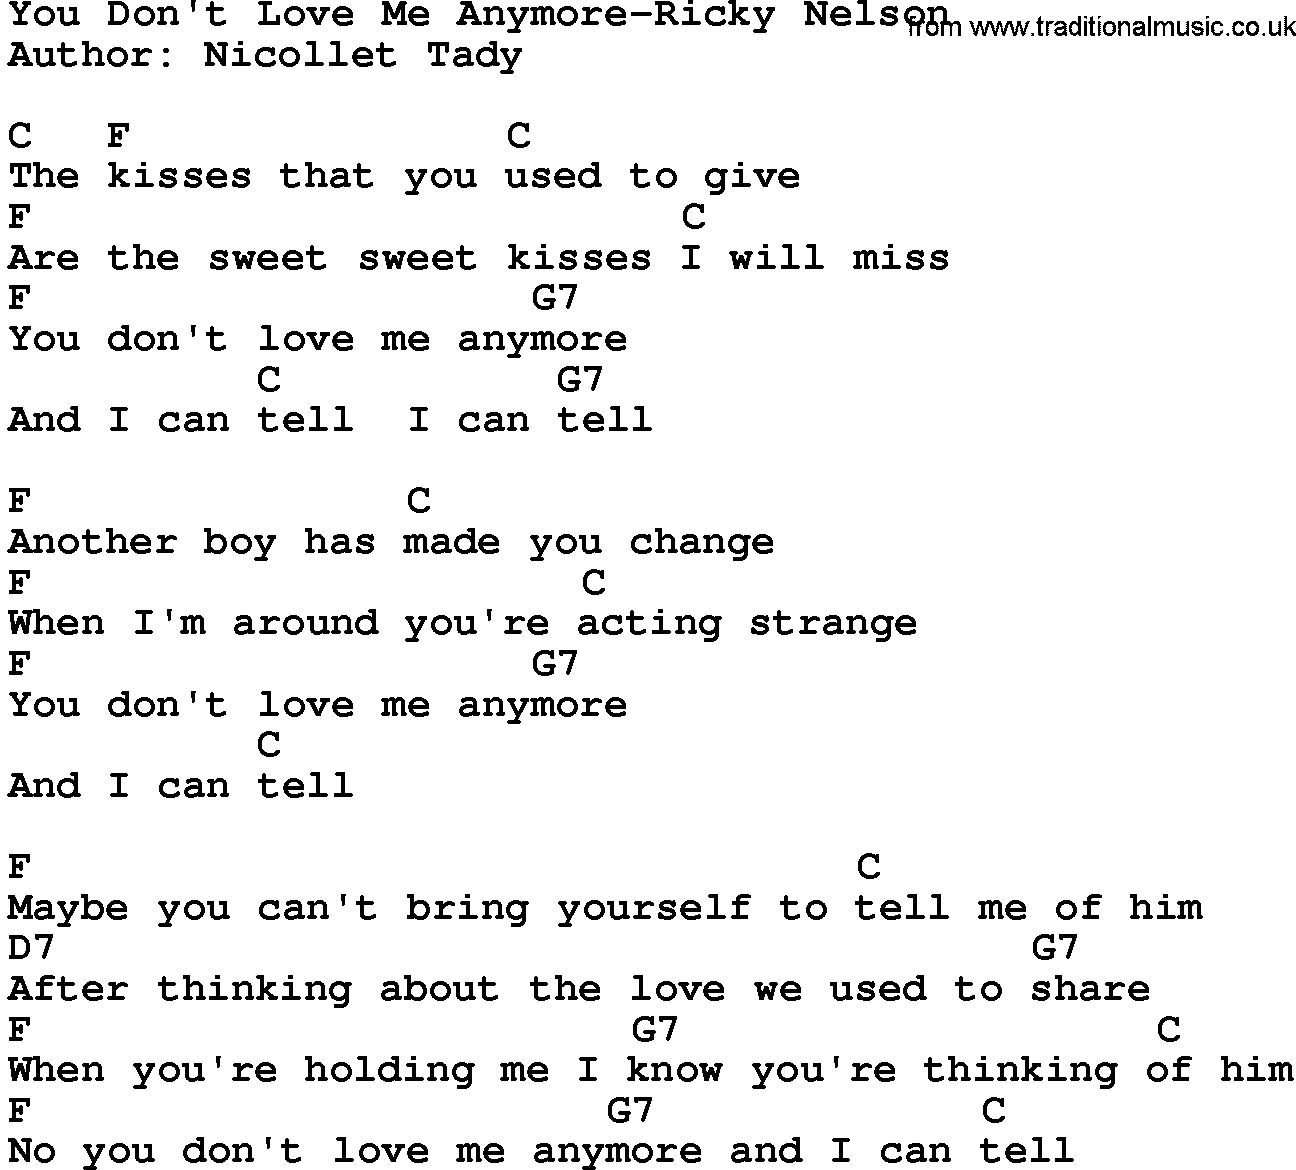 Country music song: You Don't Love Me Anymore-Ricky Nelson lyrics and chords